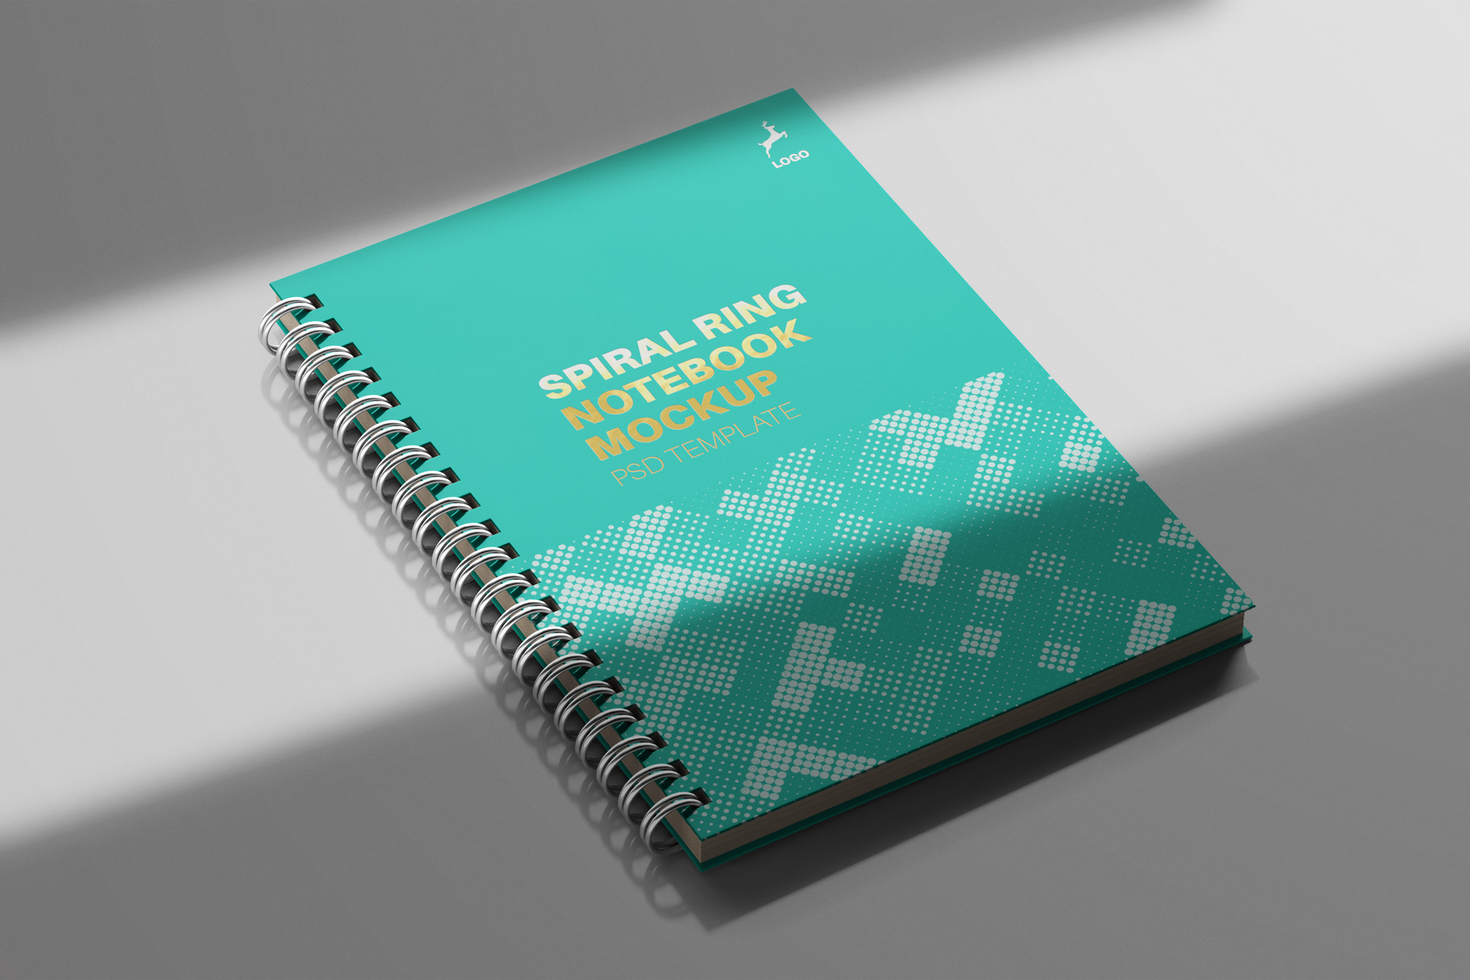 a5 wire bound spiral ring binder diary corporate notebook planner realistic mockup design template psd